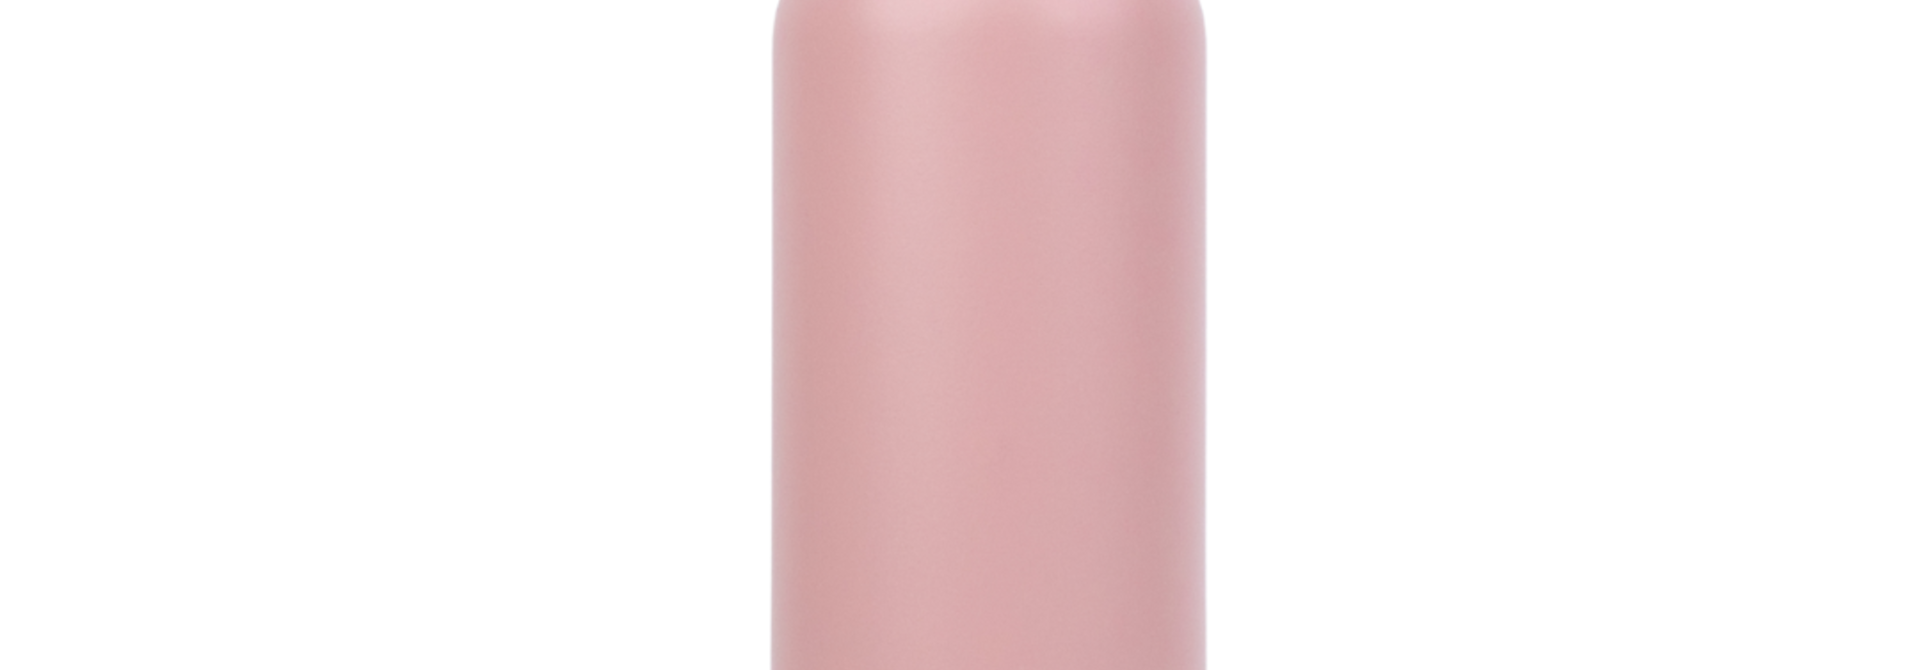 MontiiCo Original Thermos Bottle - Stainless Steel - Blossom pink - 600ml